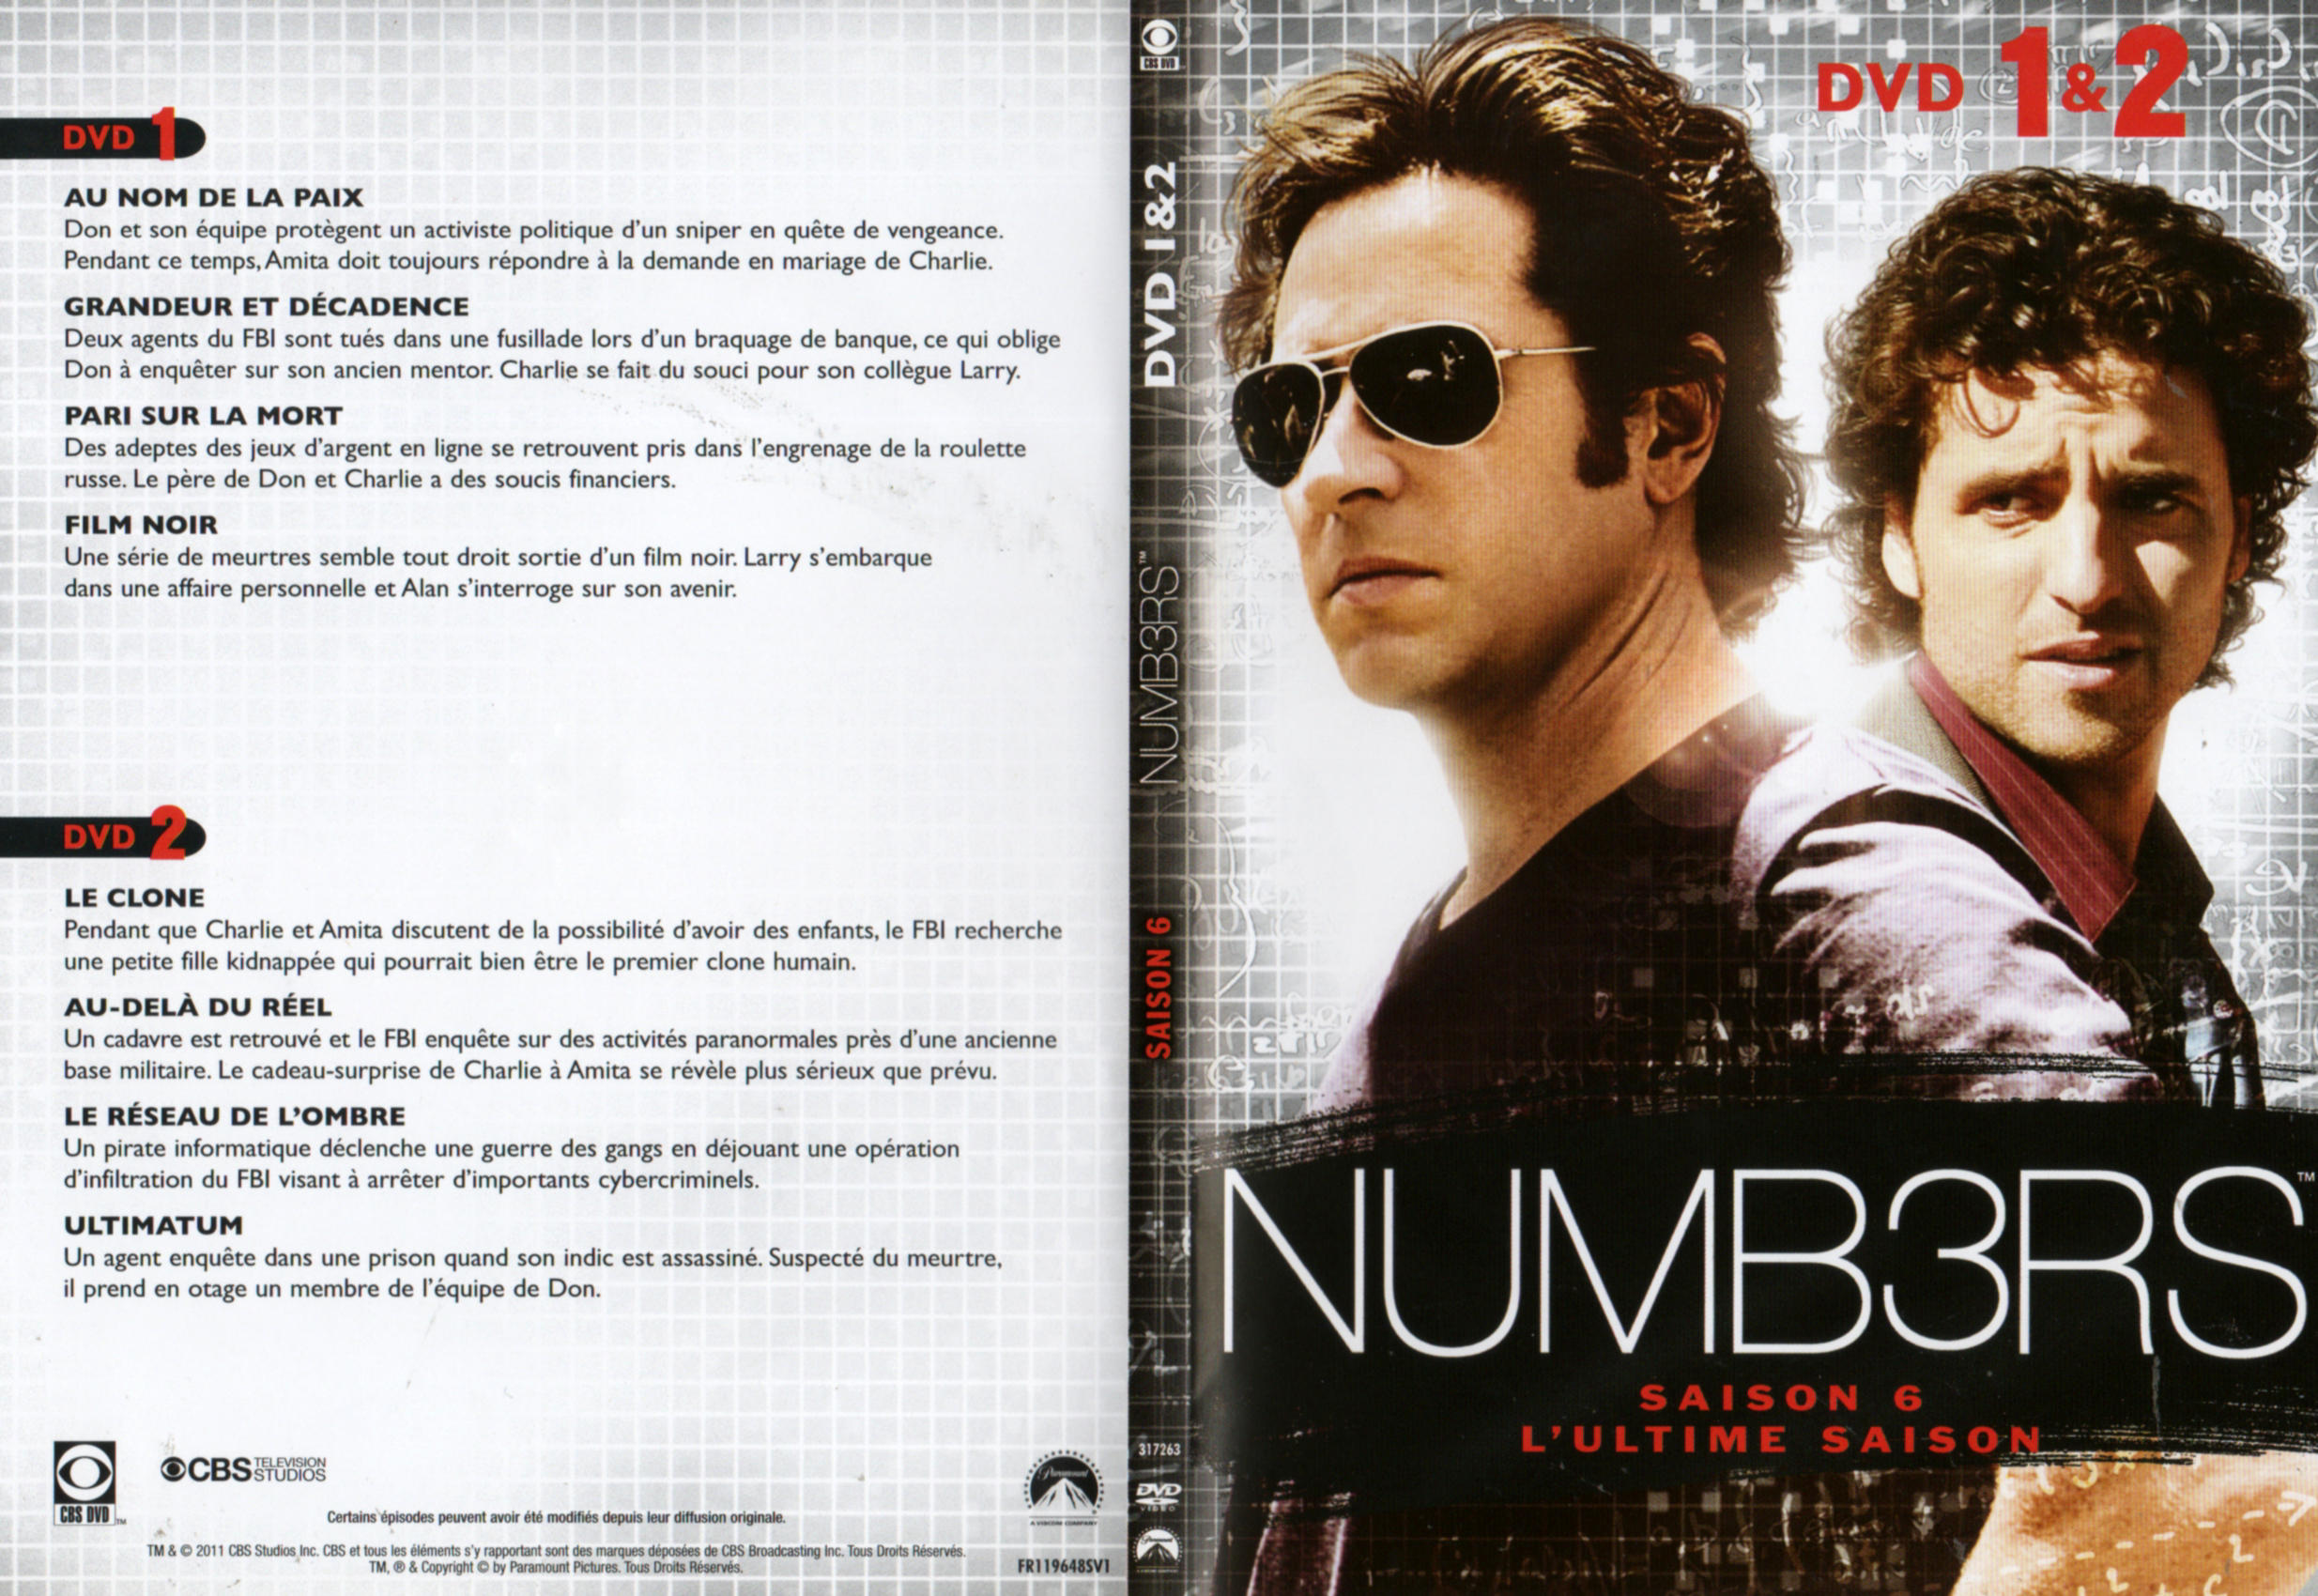 Jaquette DVD Numbers Saison 6 DVD 1